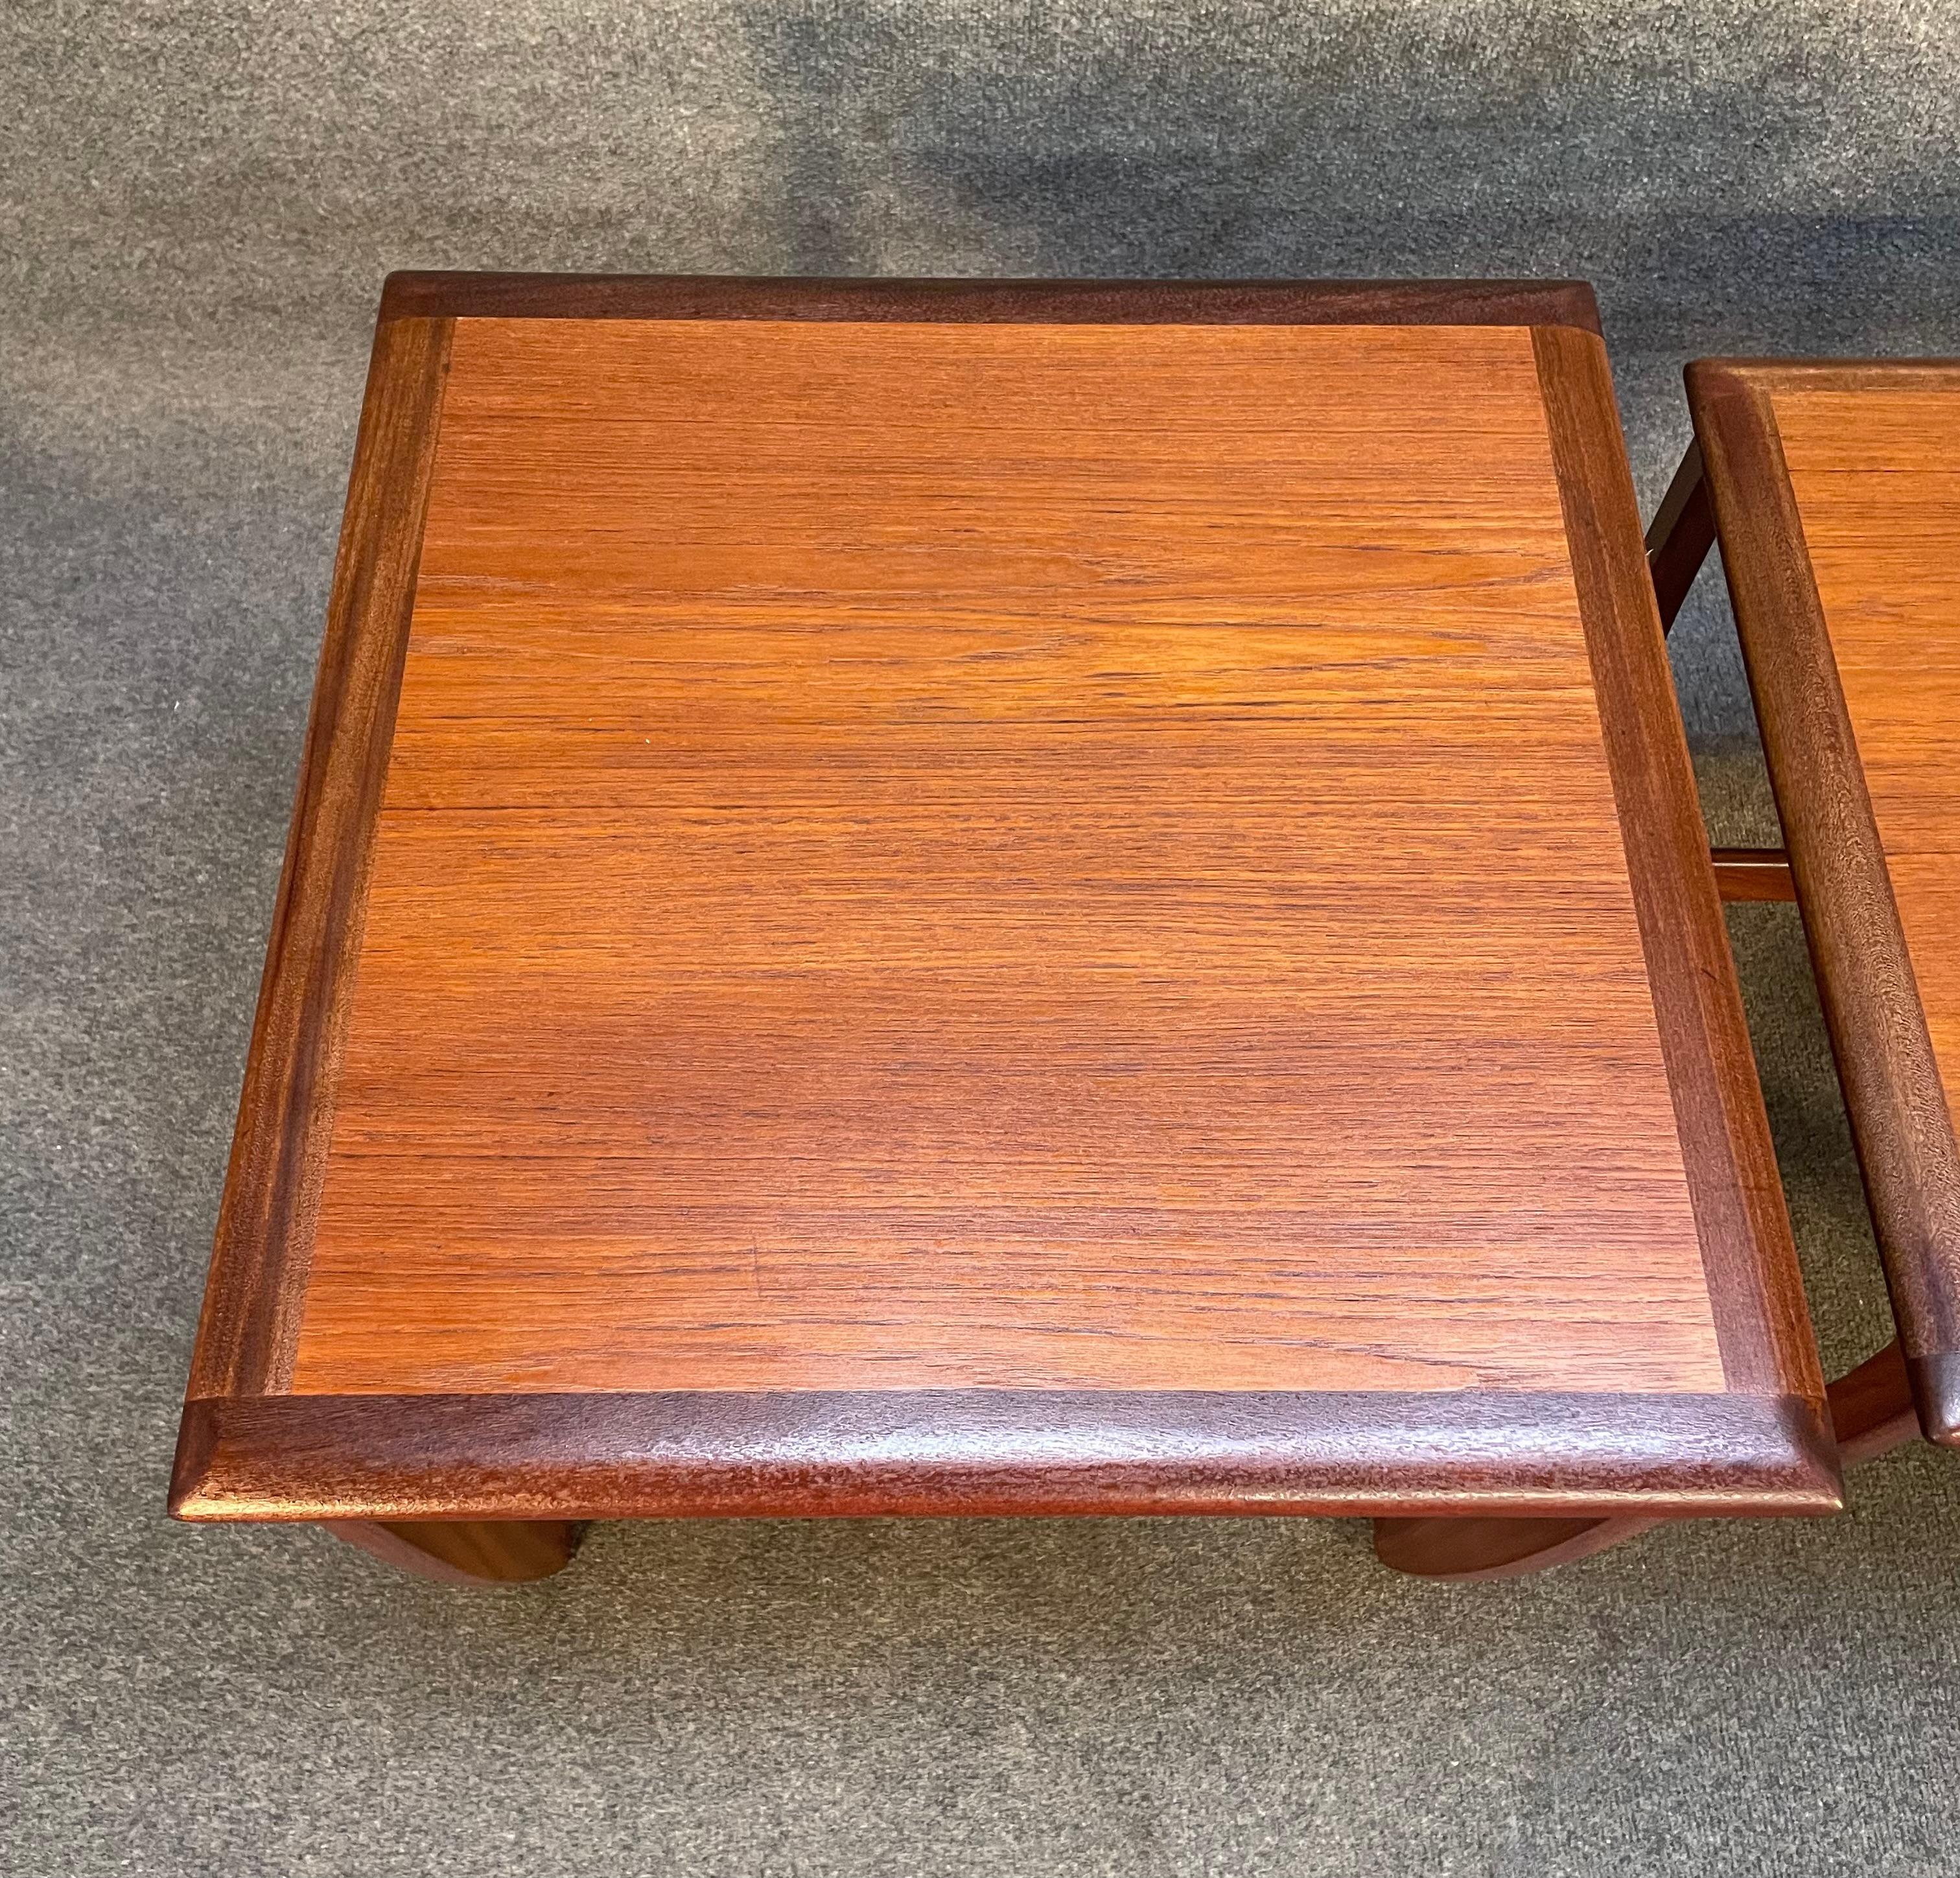 Here is a beautiful British Mid-Century Modern set of three teak nesting tables from the 